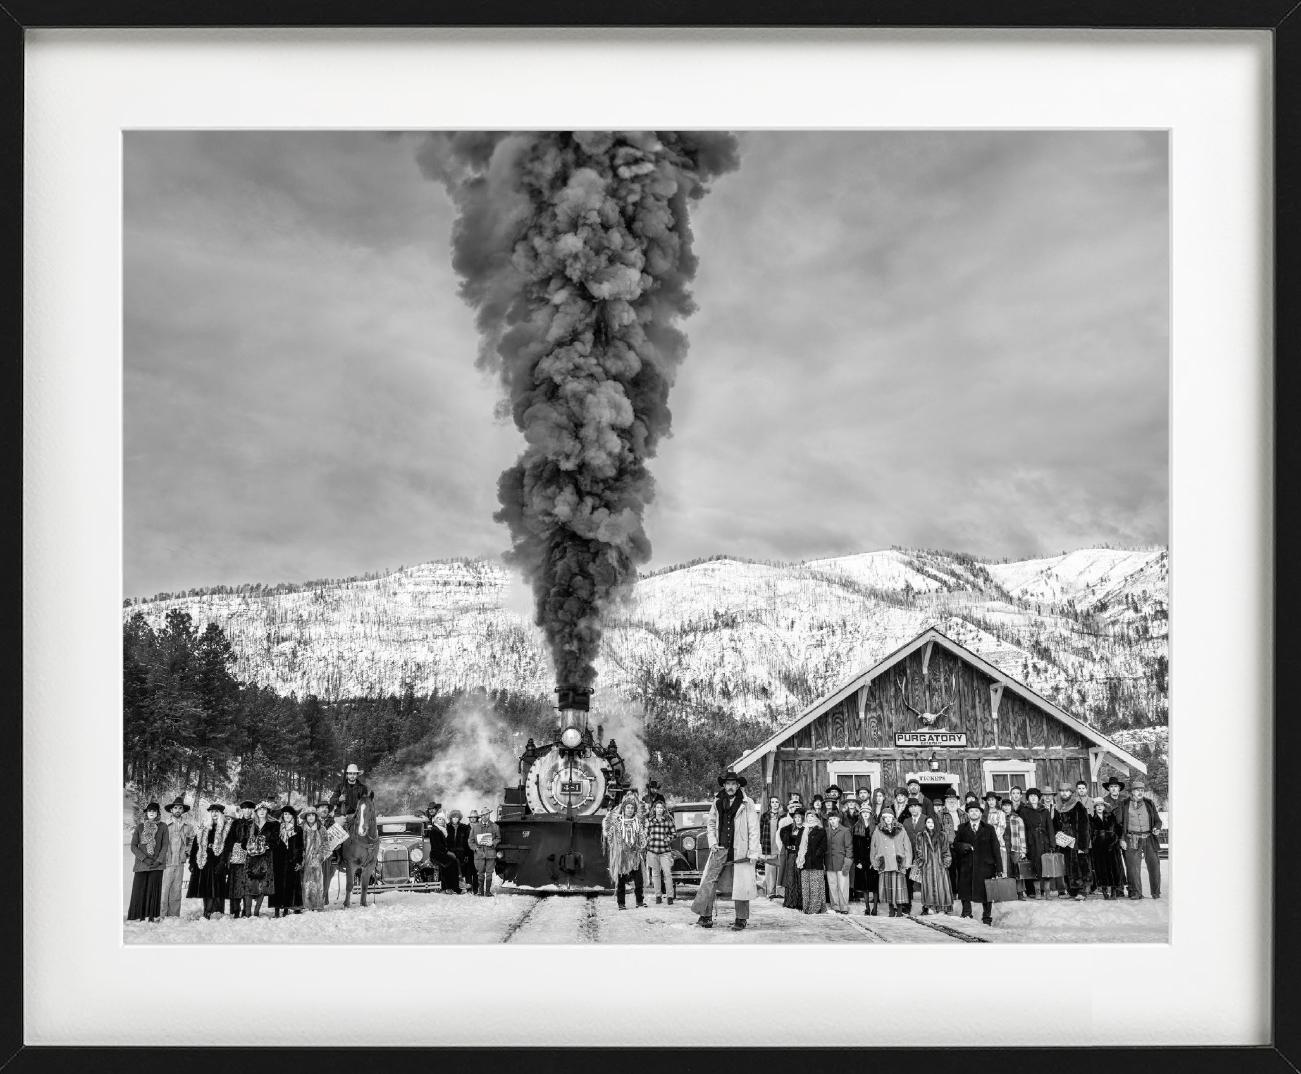 All prints are limited edition. Available in multiple sizes. High-end framing on request.

All prints are done and signed by the artist. The collector receives an additional certificate of authenticity from the gallery.

'Purgatory' by David Yarrow